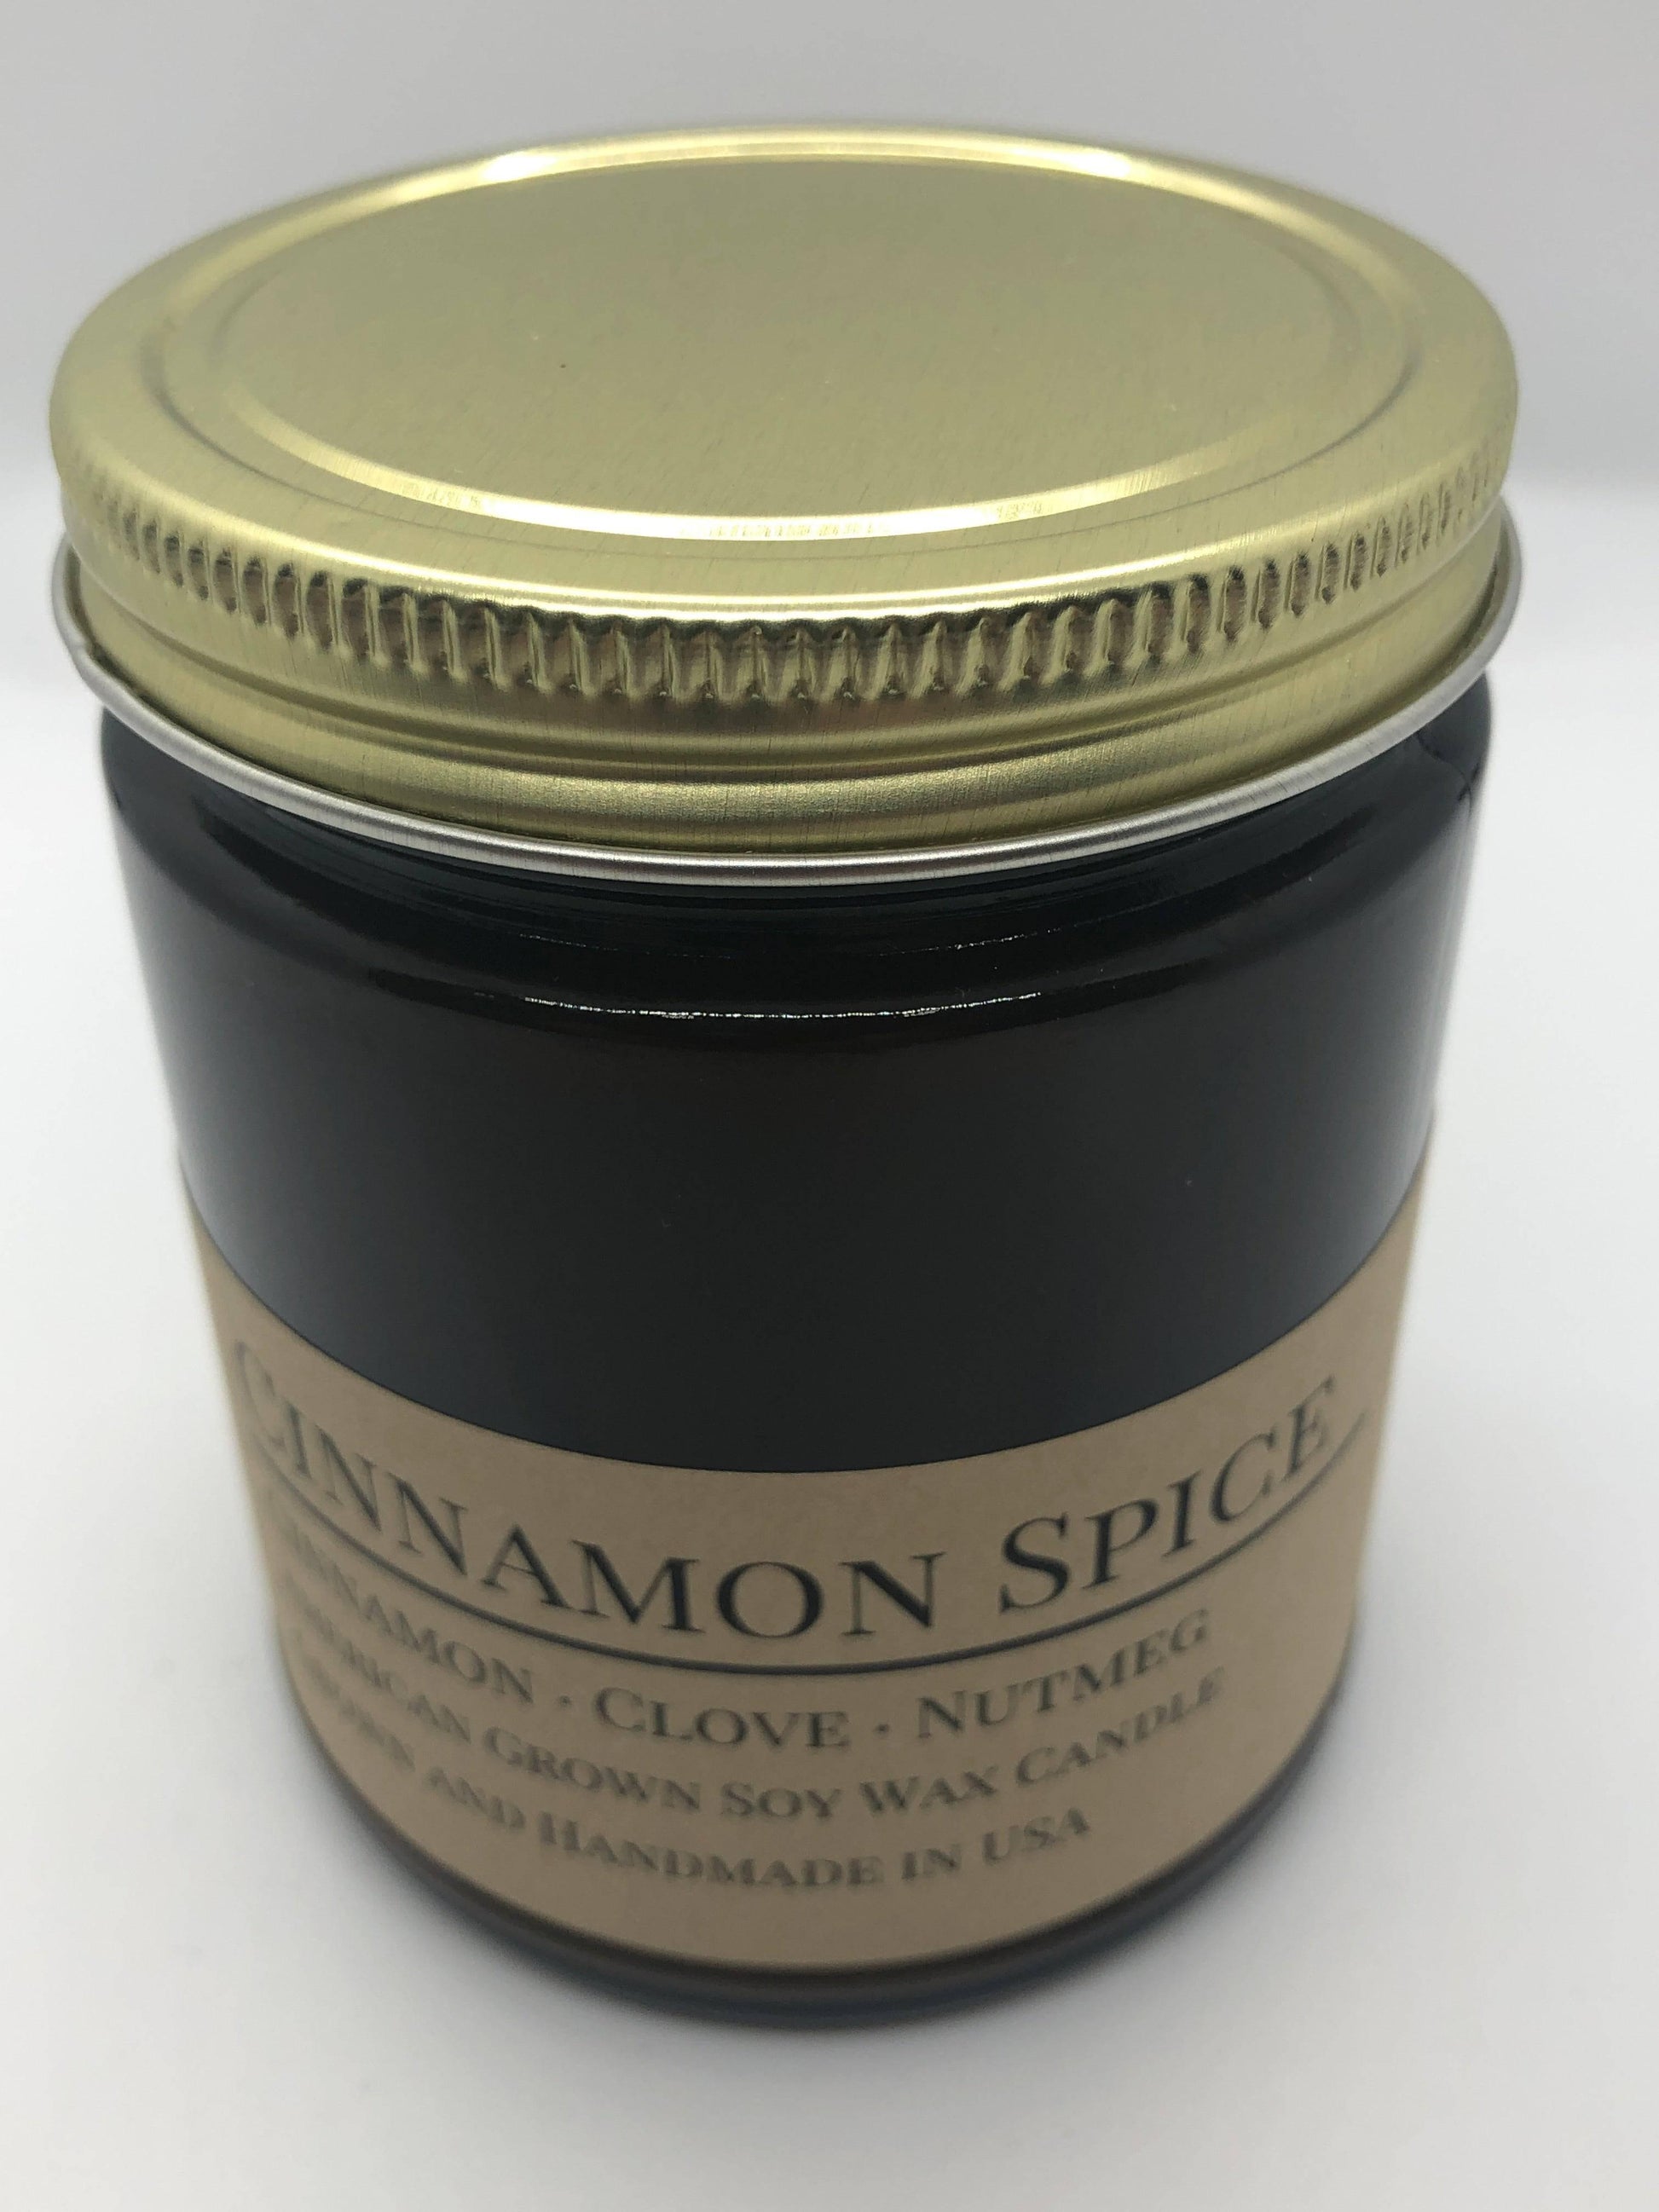 Cinnamon Spice Soy Wax Candle | 9 oz Amber Apothecary Jar - Prairie Fire Candles